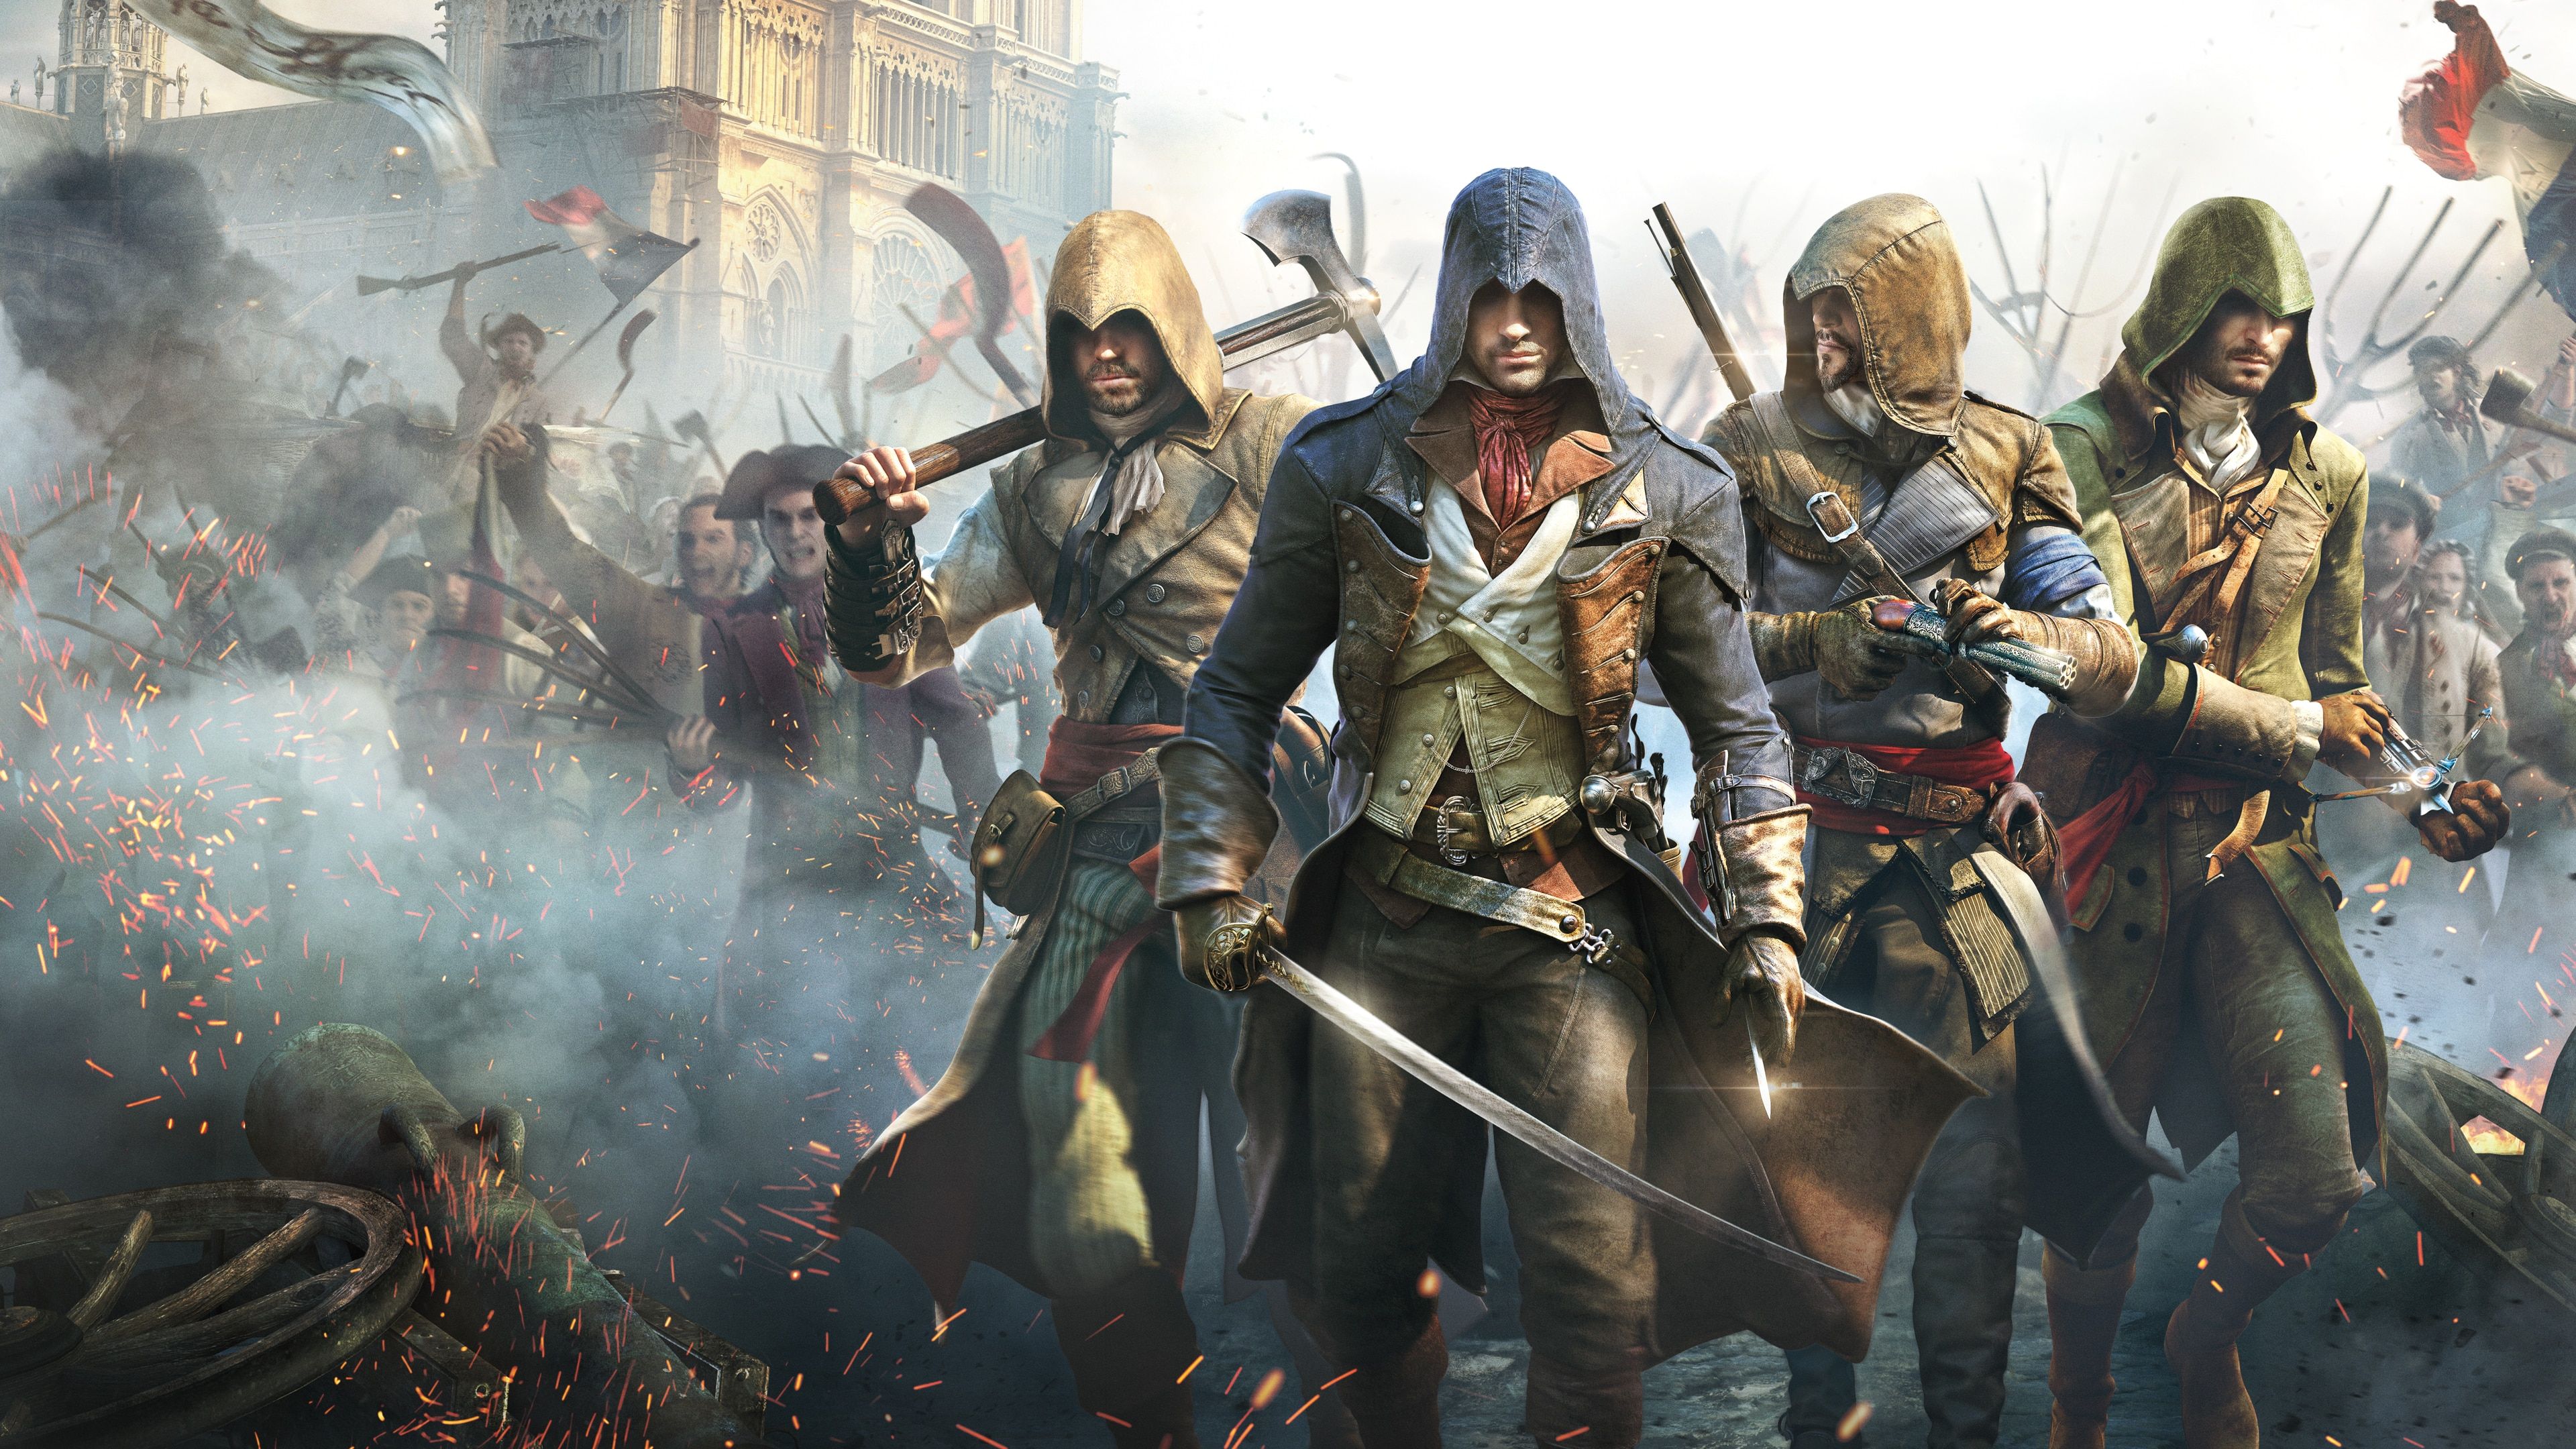 Assassin's Creed® Unity cover image